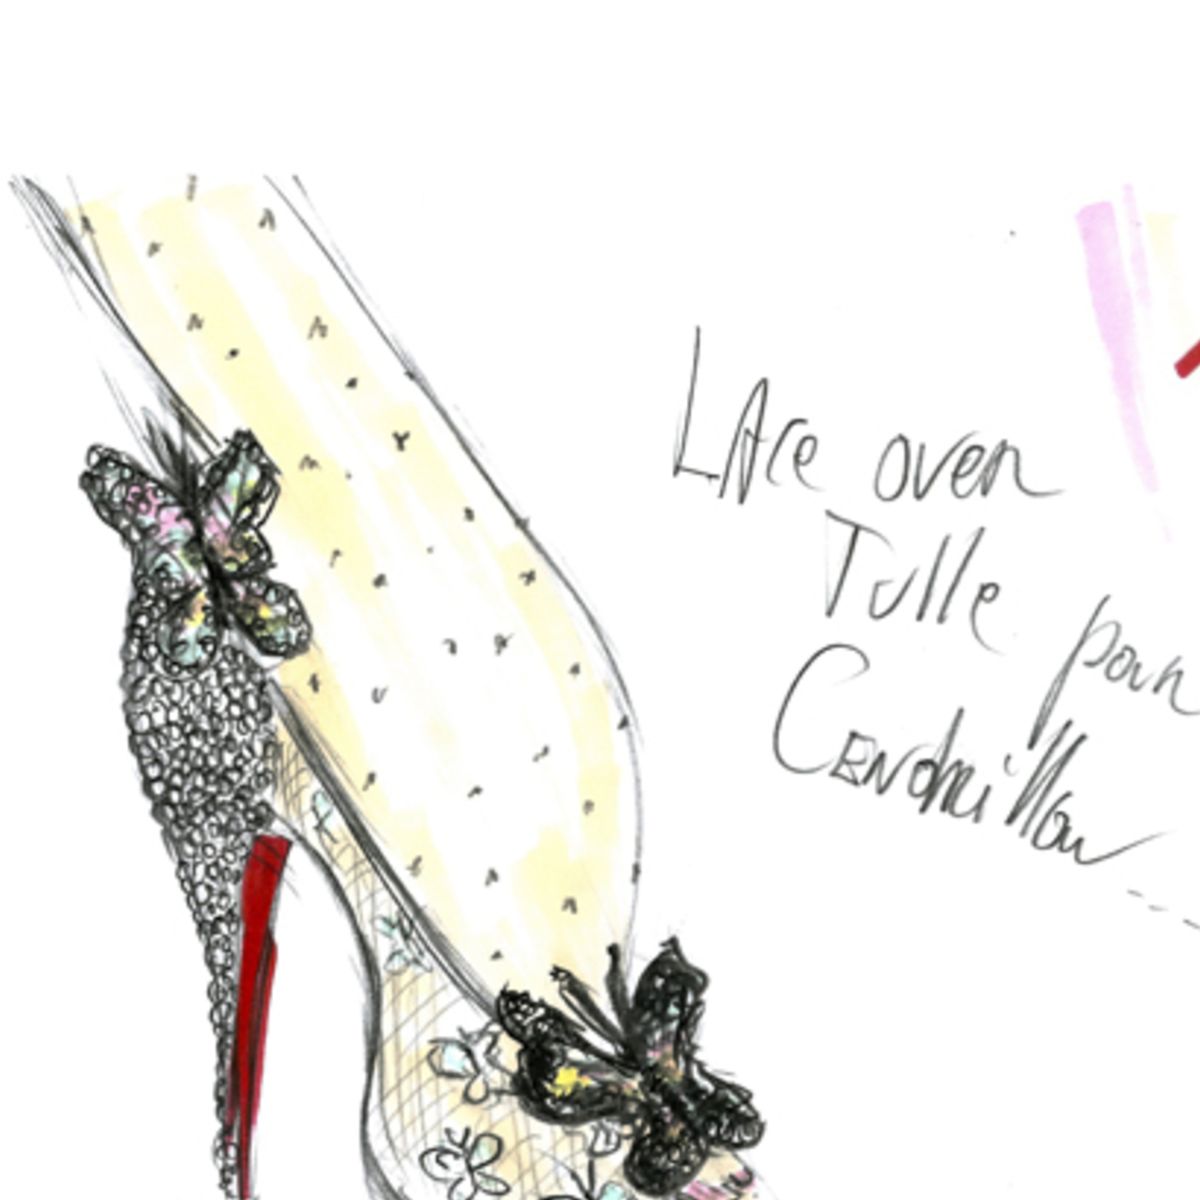 Cinderella Shoes by Christian Louboutin: Fairy Tale Red Bottom Heels